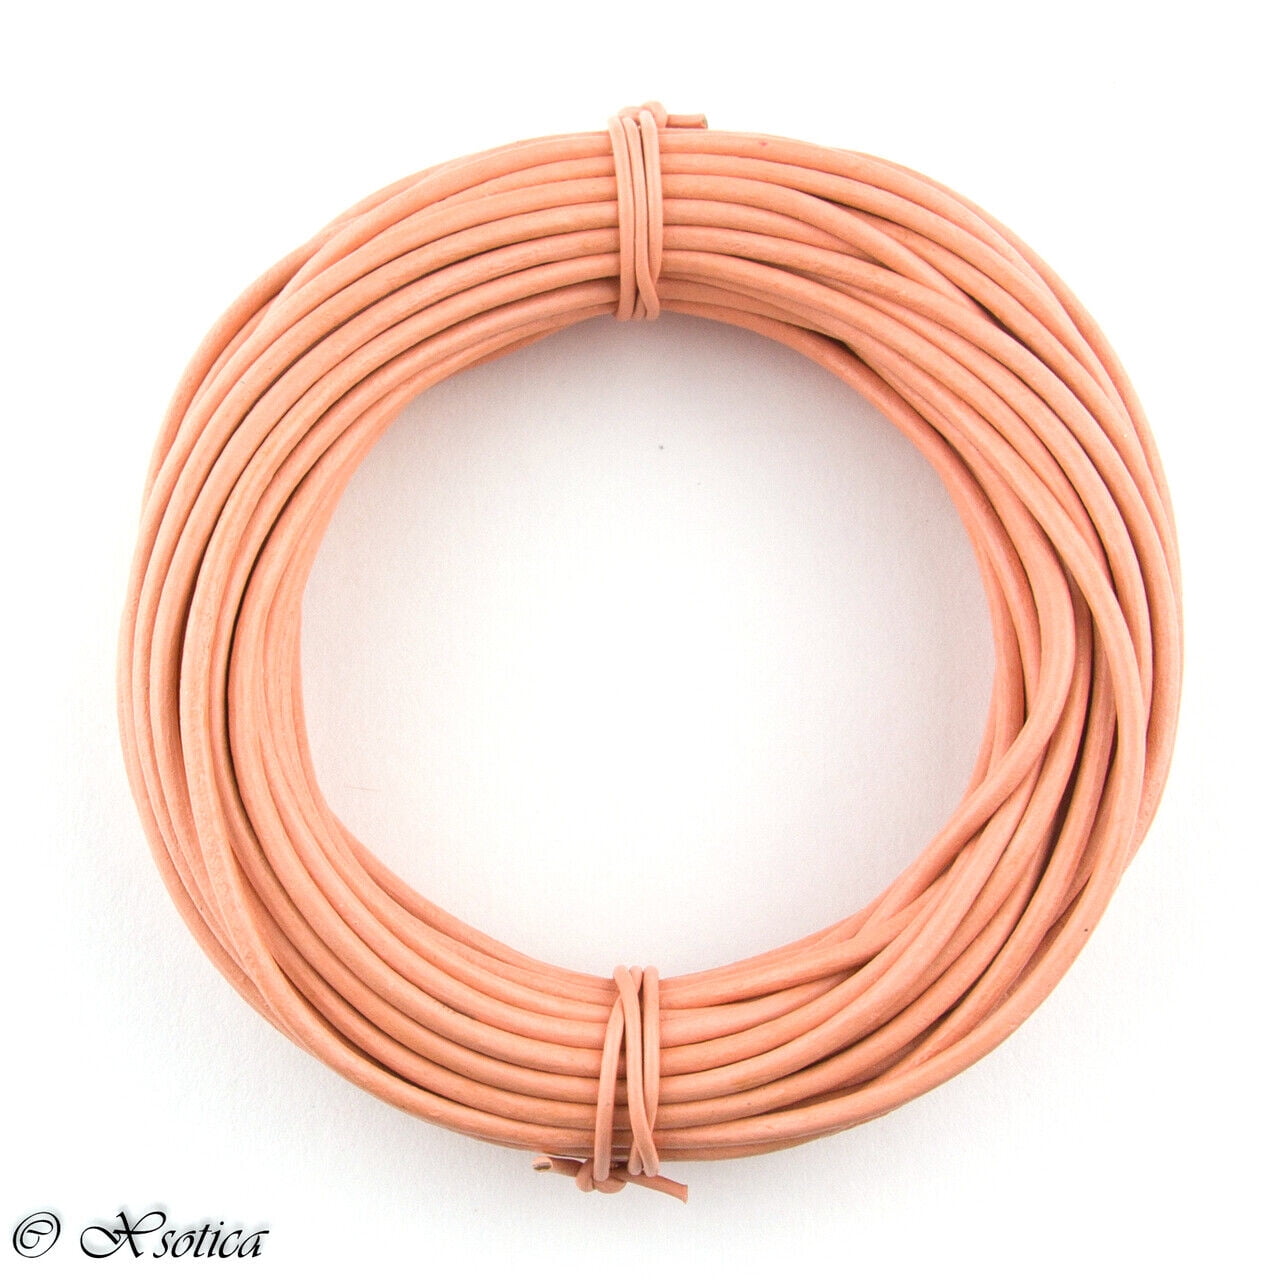 1mm Leather Cord,genuine Leather String Cord,18gauge Round Leather